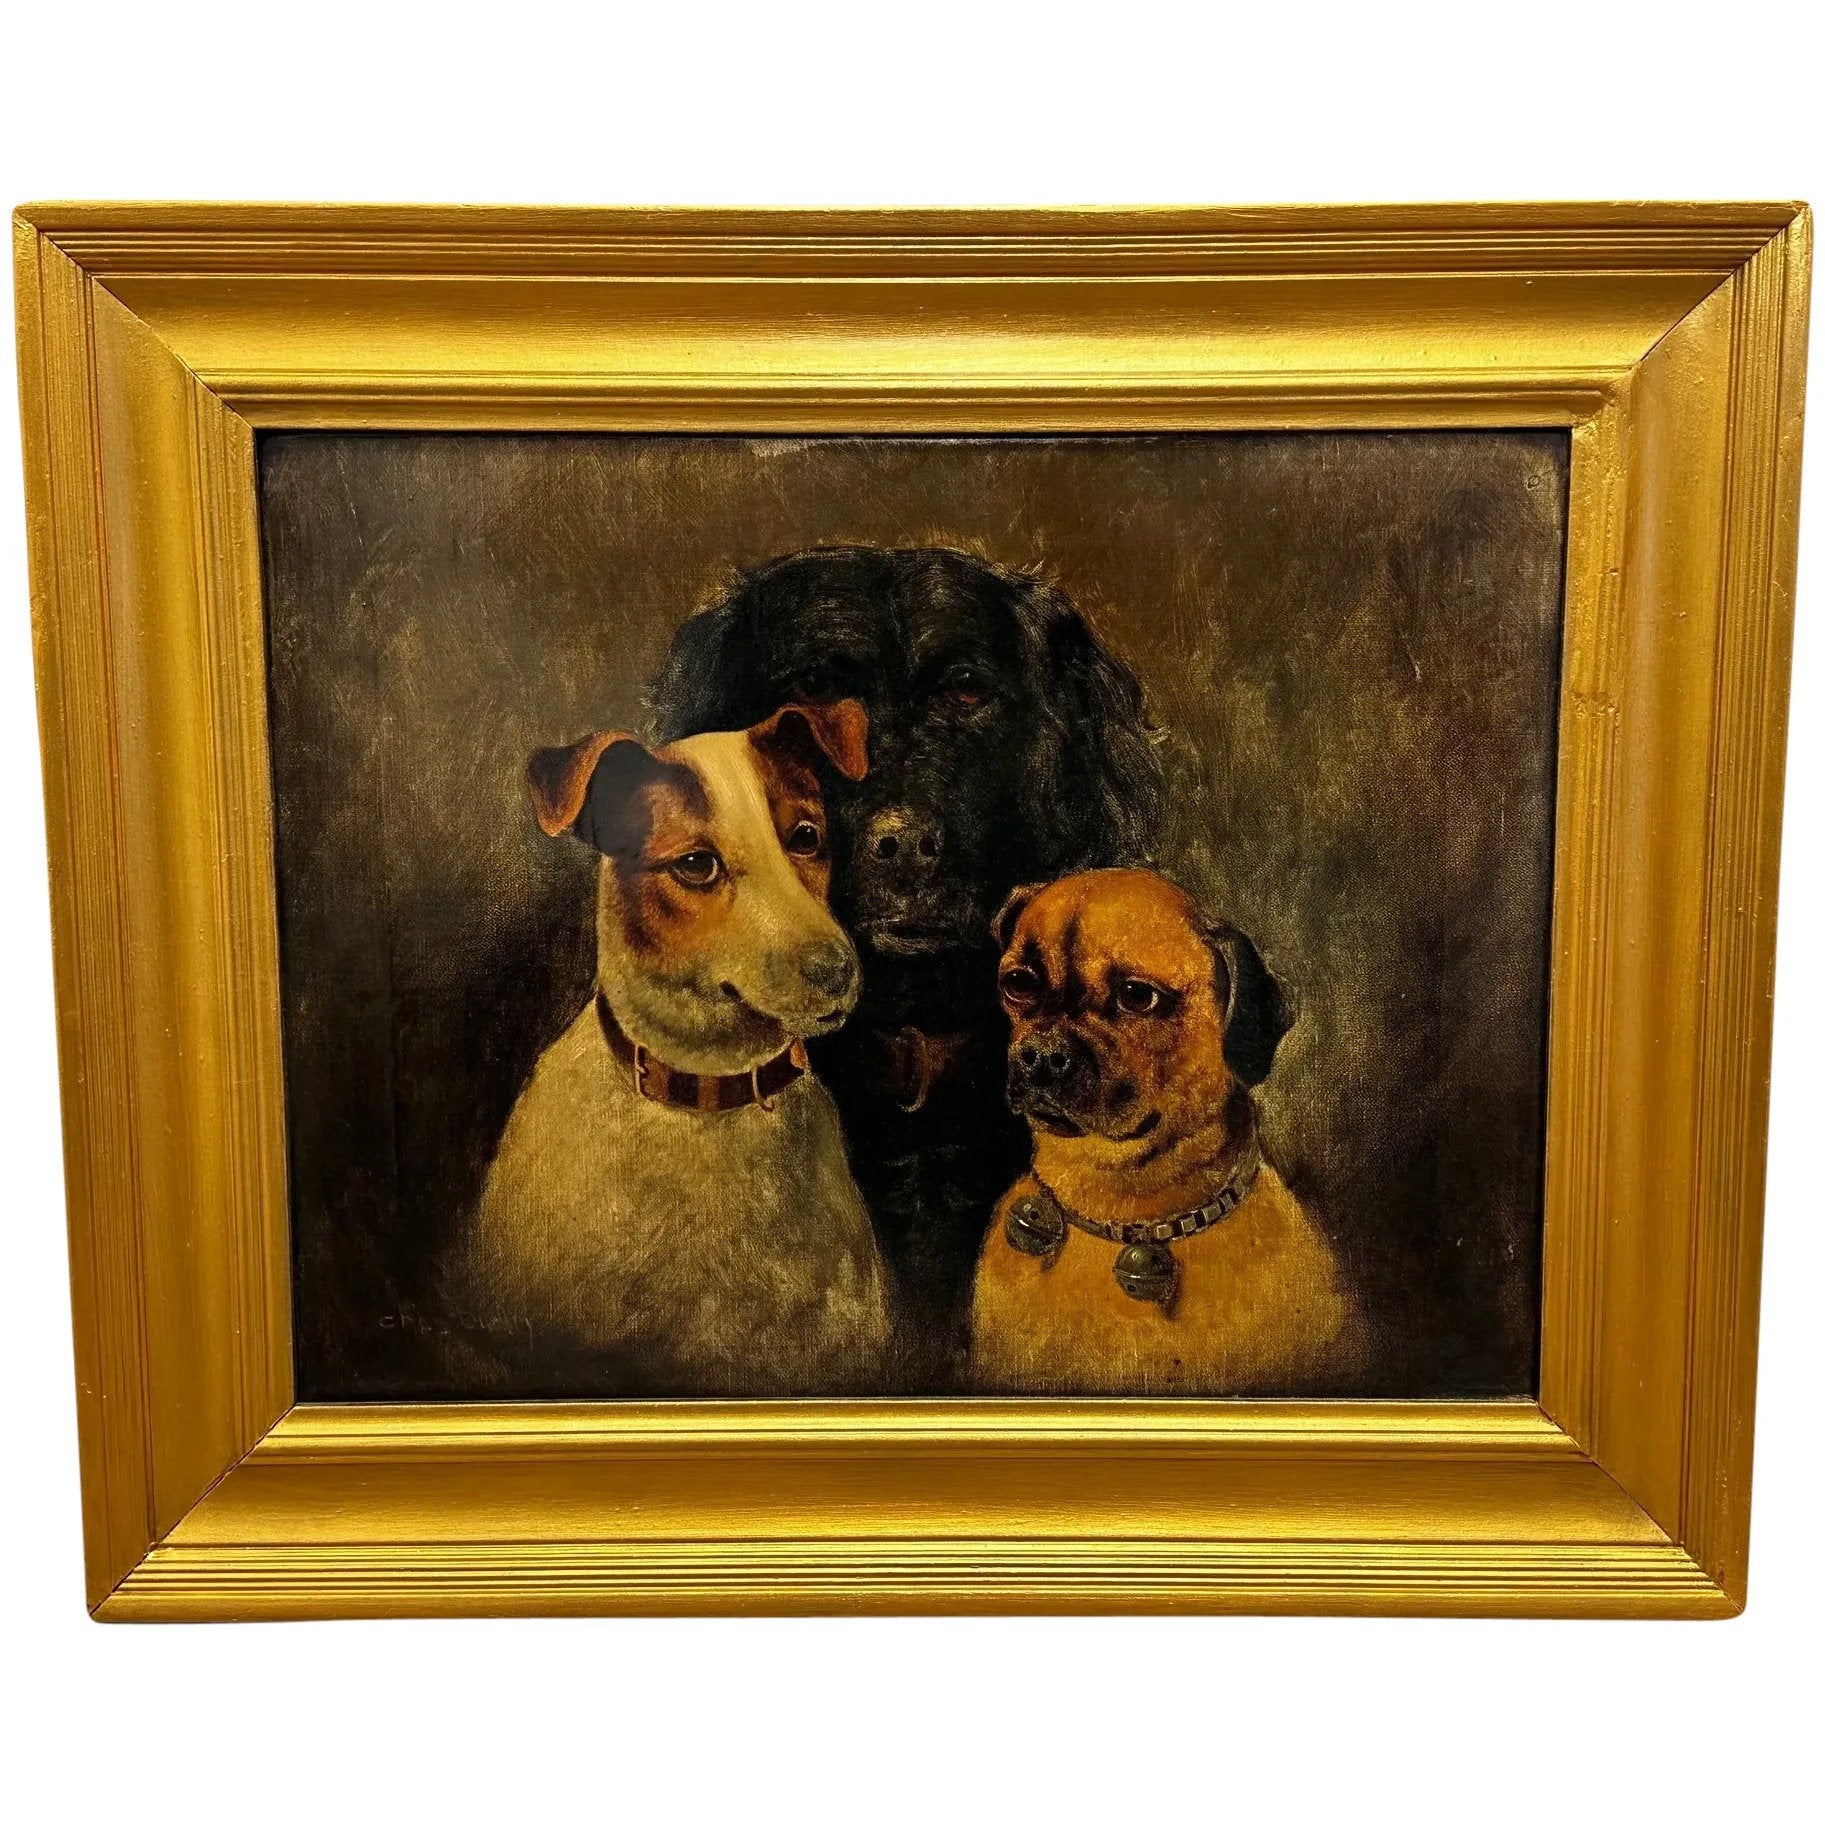 Victorian Oil Painting The Three Graces Jack Russell, Cocker Spaniel & Pug Dogs - Cheshire Antiques Consultant